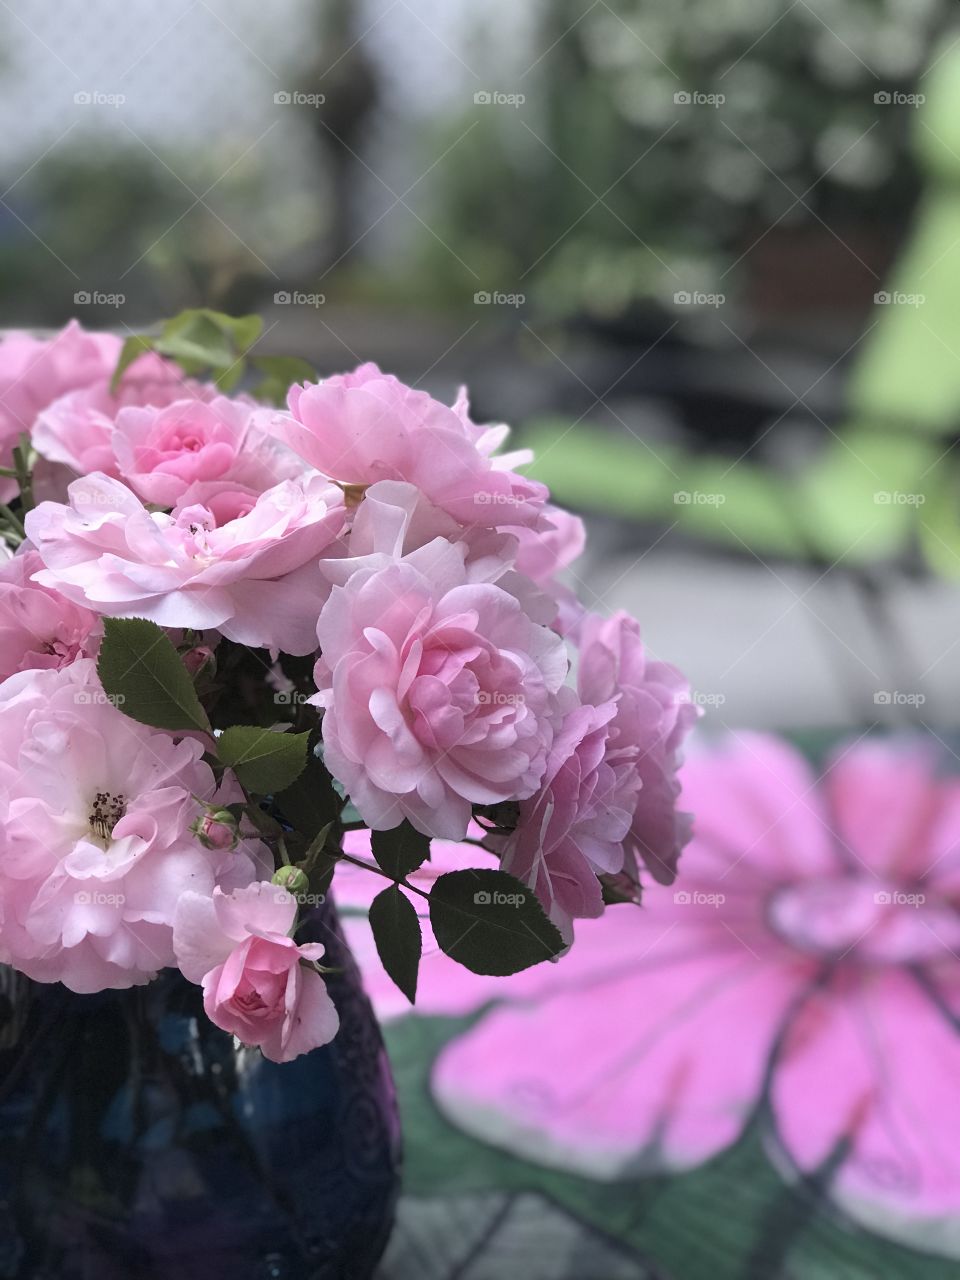 Sitting on my deck watching the golden sun set & admiring my deck garden. Some pale pink roses I cut from my overgrown rosebush make a beautiful center piece complementing the pink & green of my tablecloth & the green chair on my deck. 💖